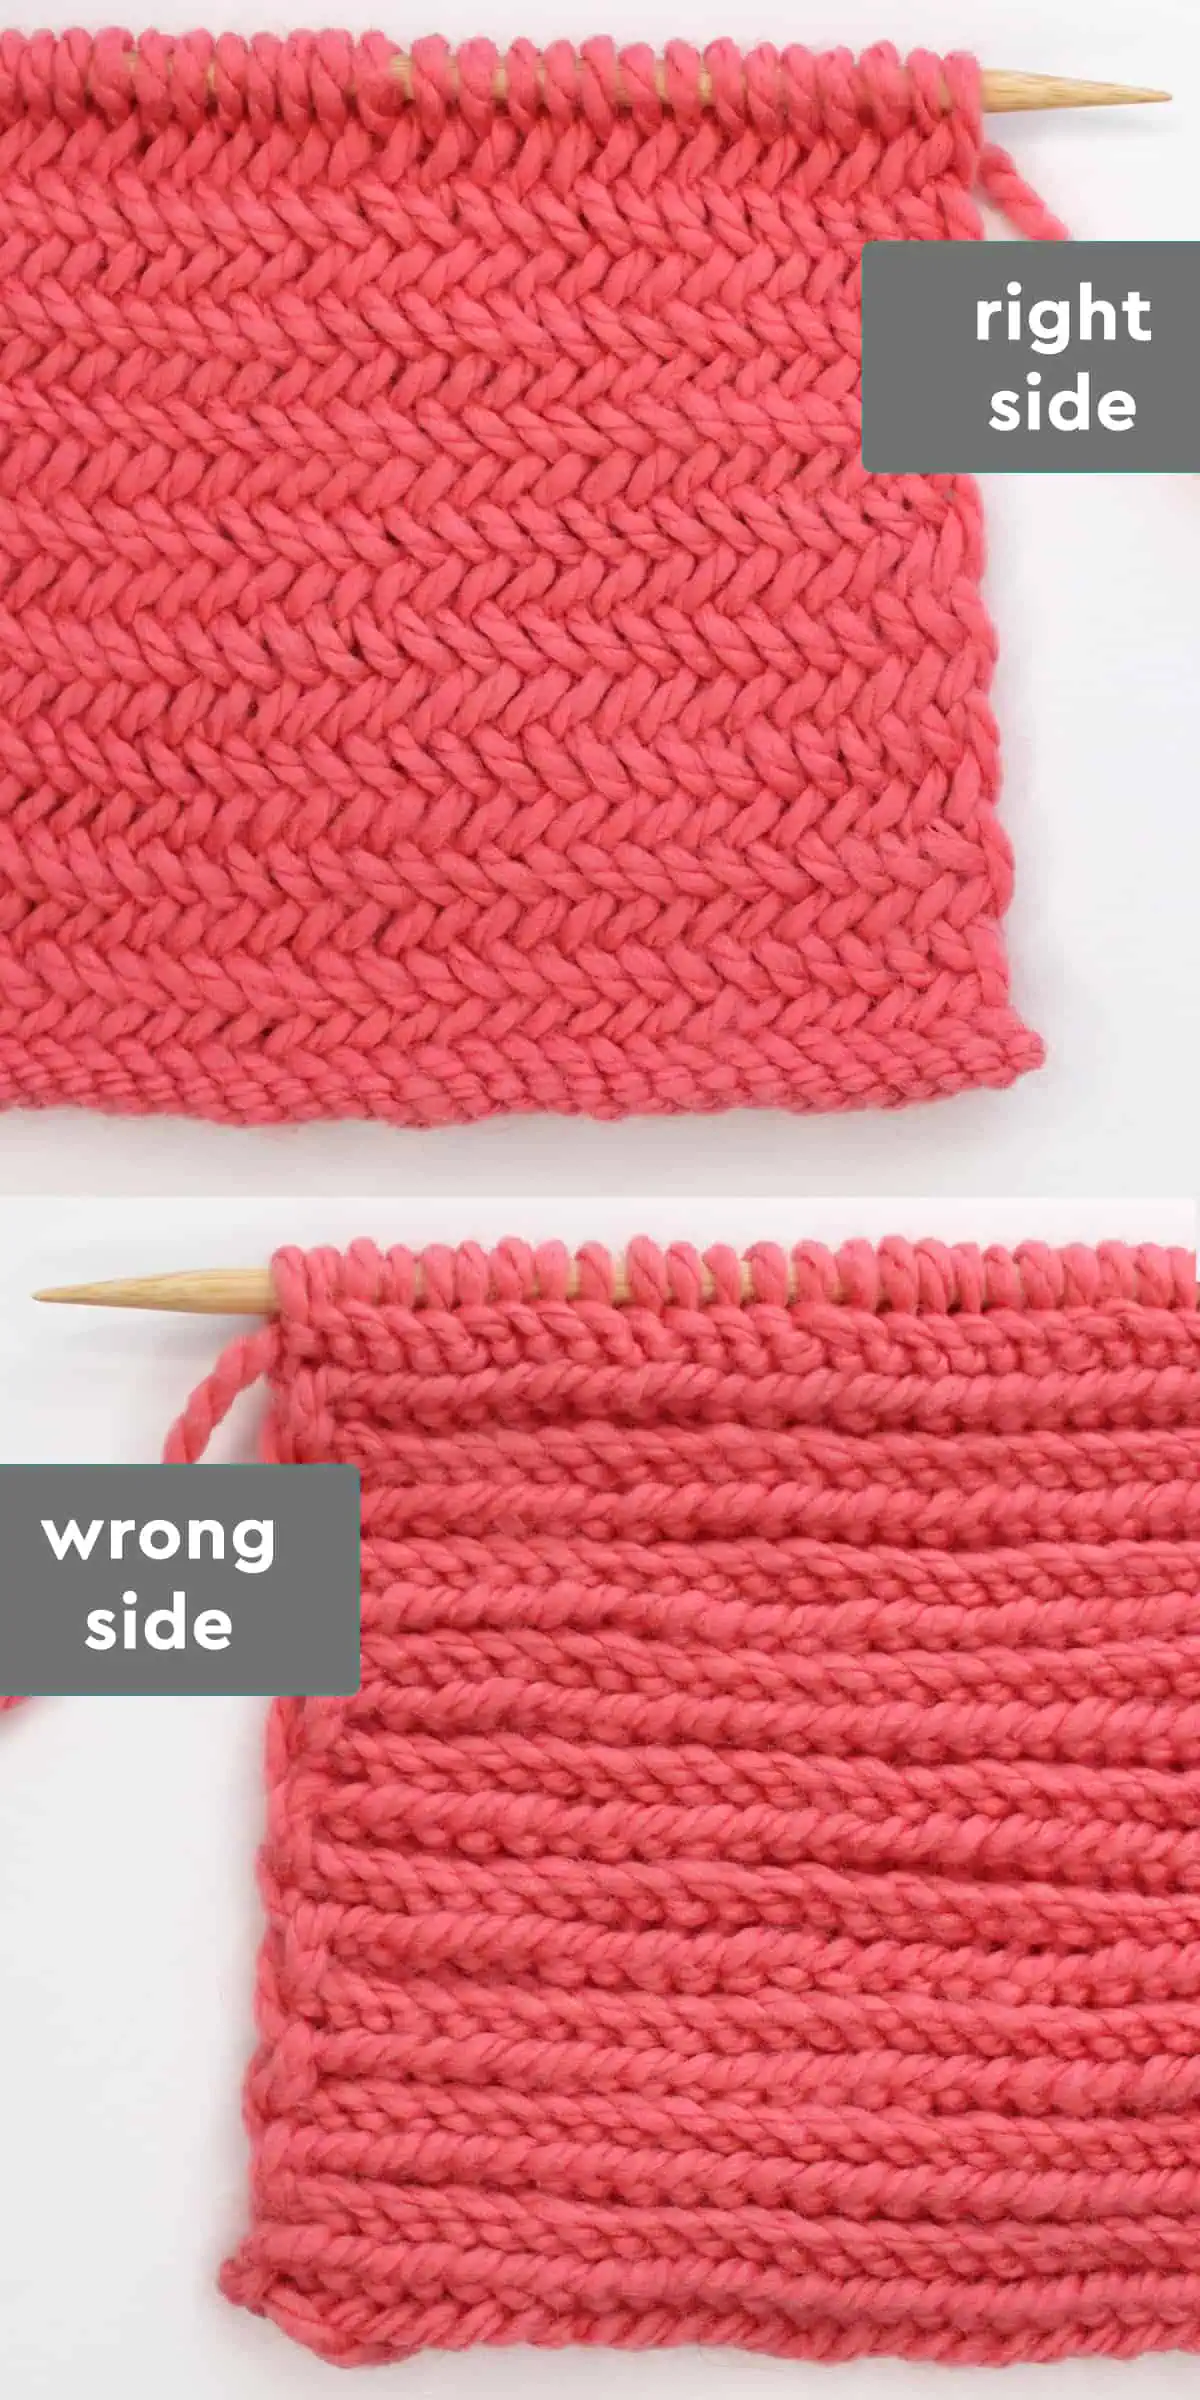 Right and wrong sides of the Horizontal Herringbone Stitch pattern in orange yarn color.